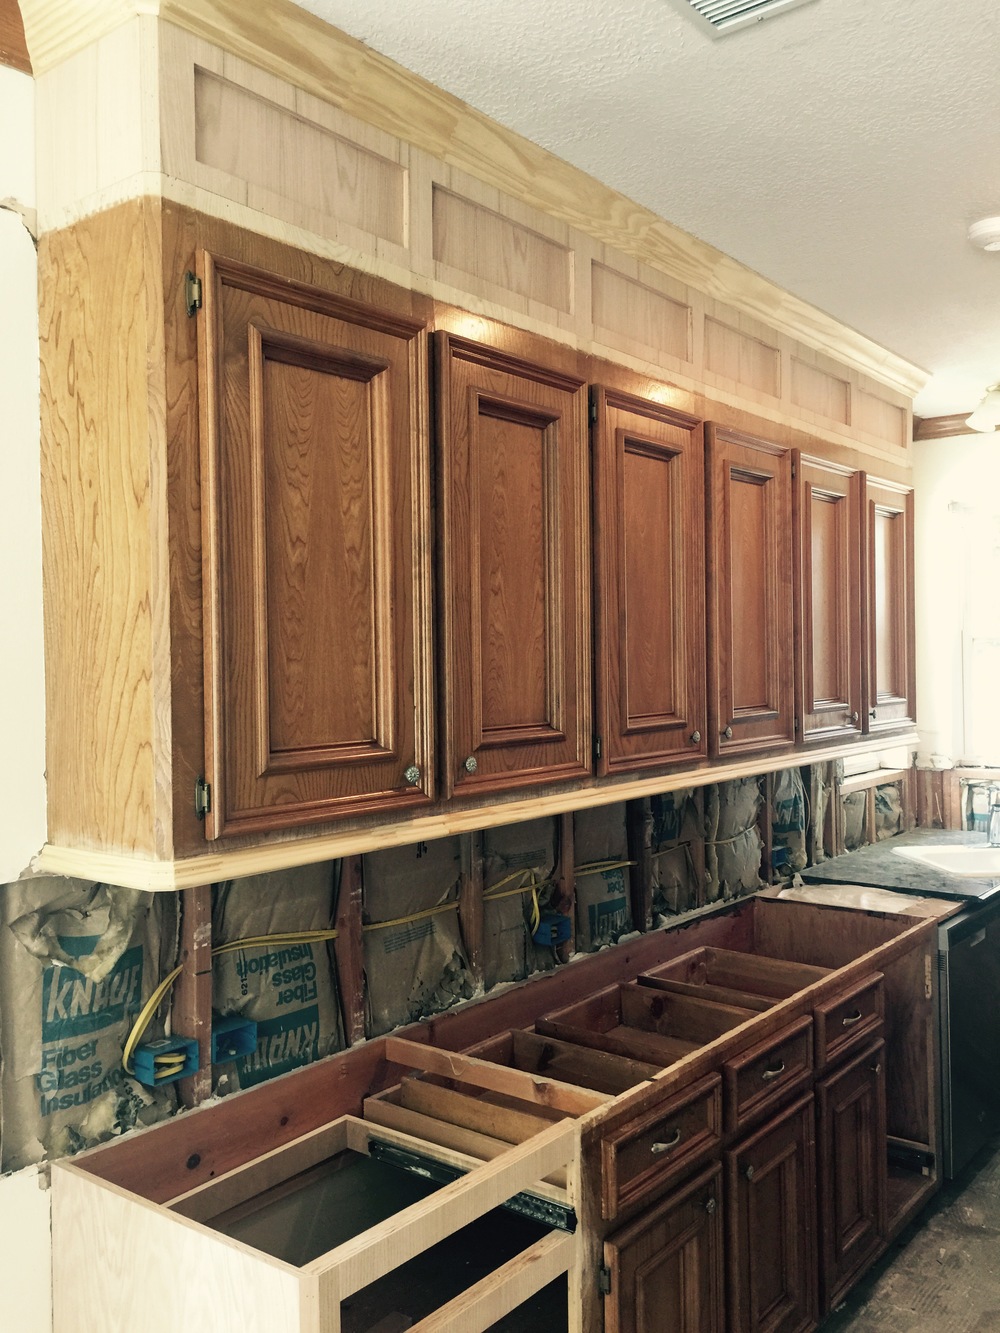 How To Make Ugly Cabinets Look Great! — DESIGNED